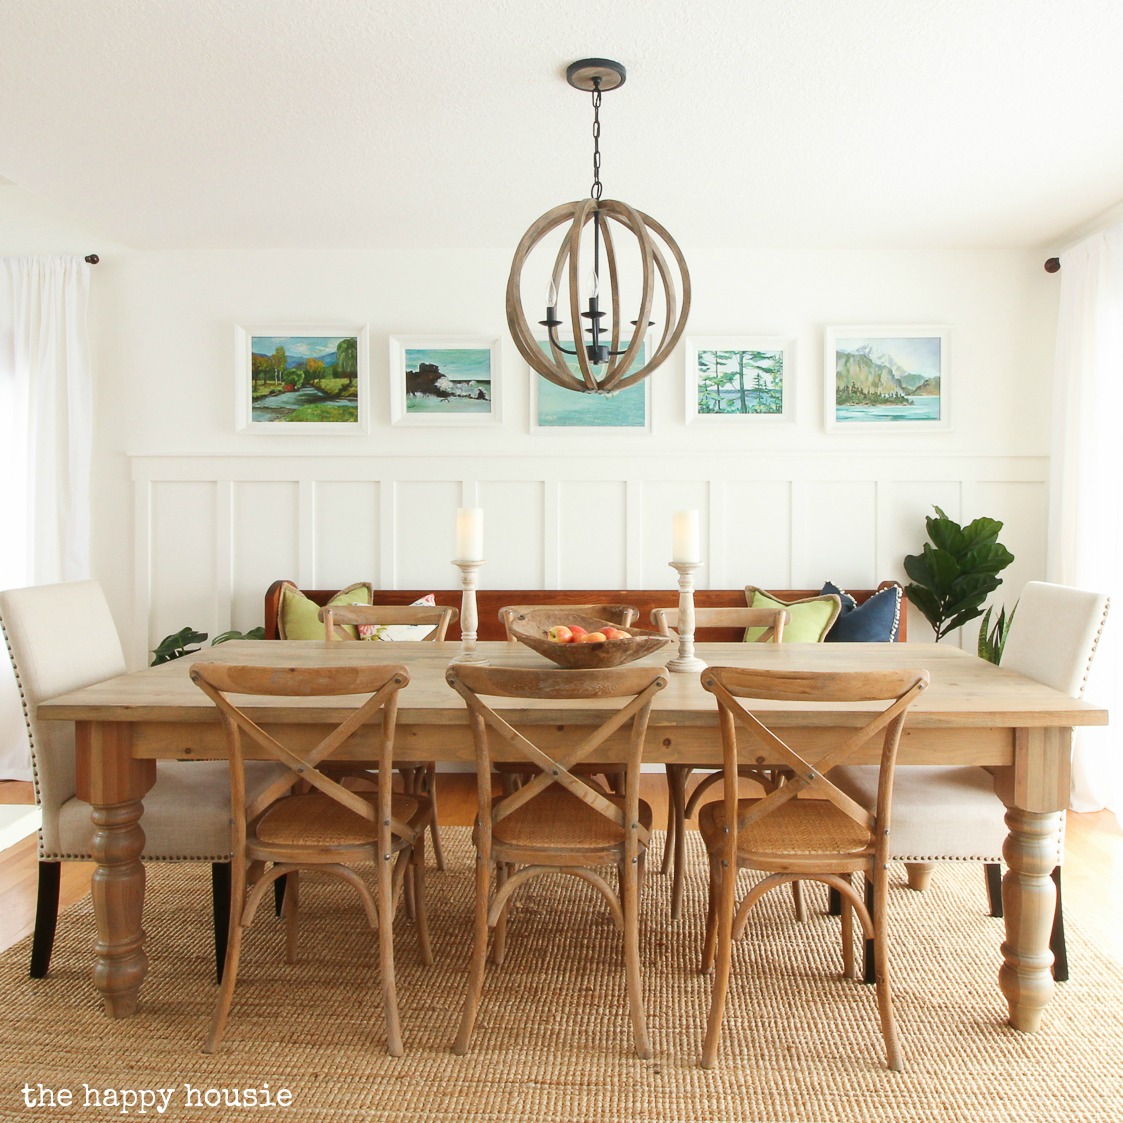 Simply white in the dining room with a wooden table and chairs.